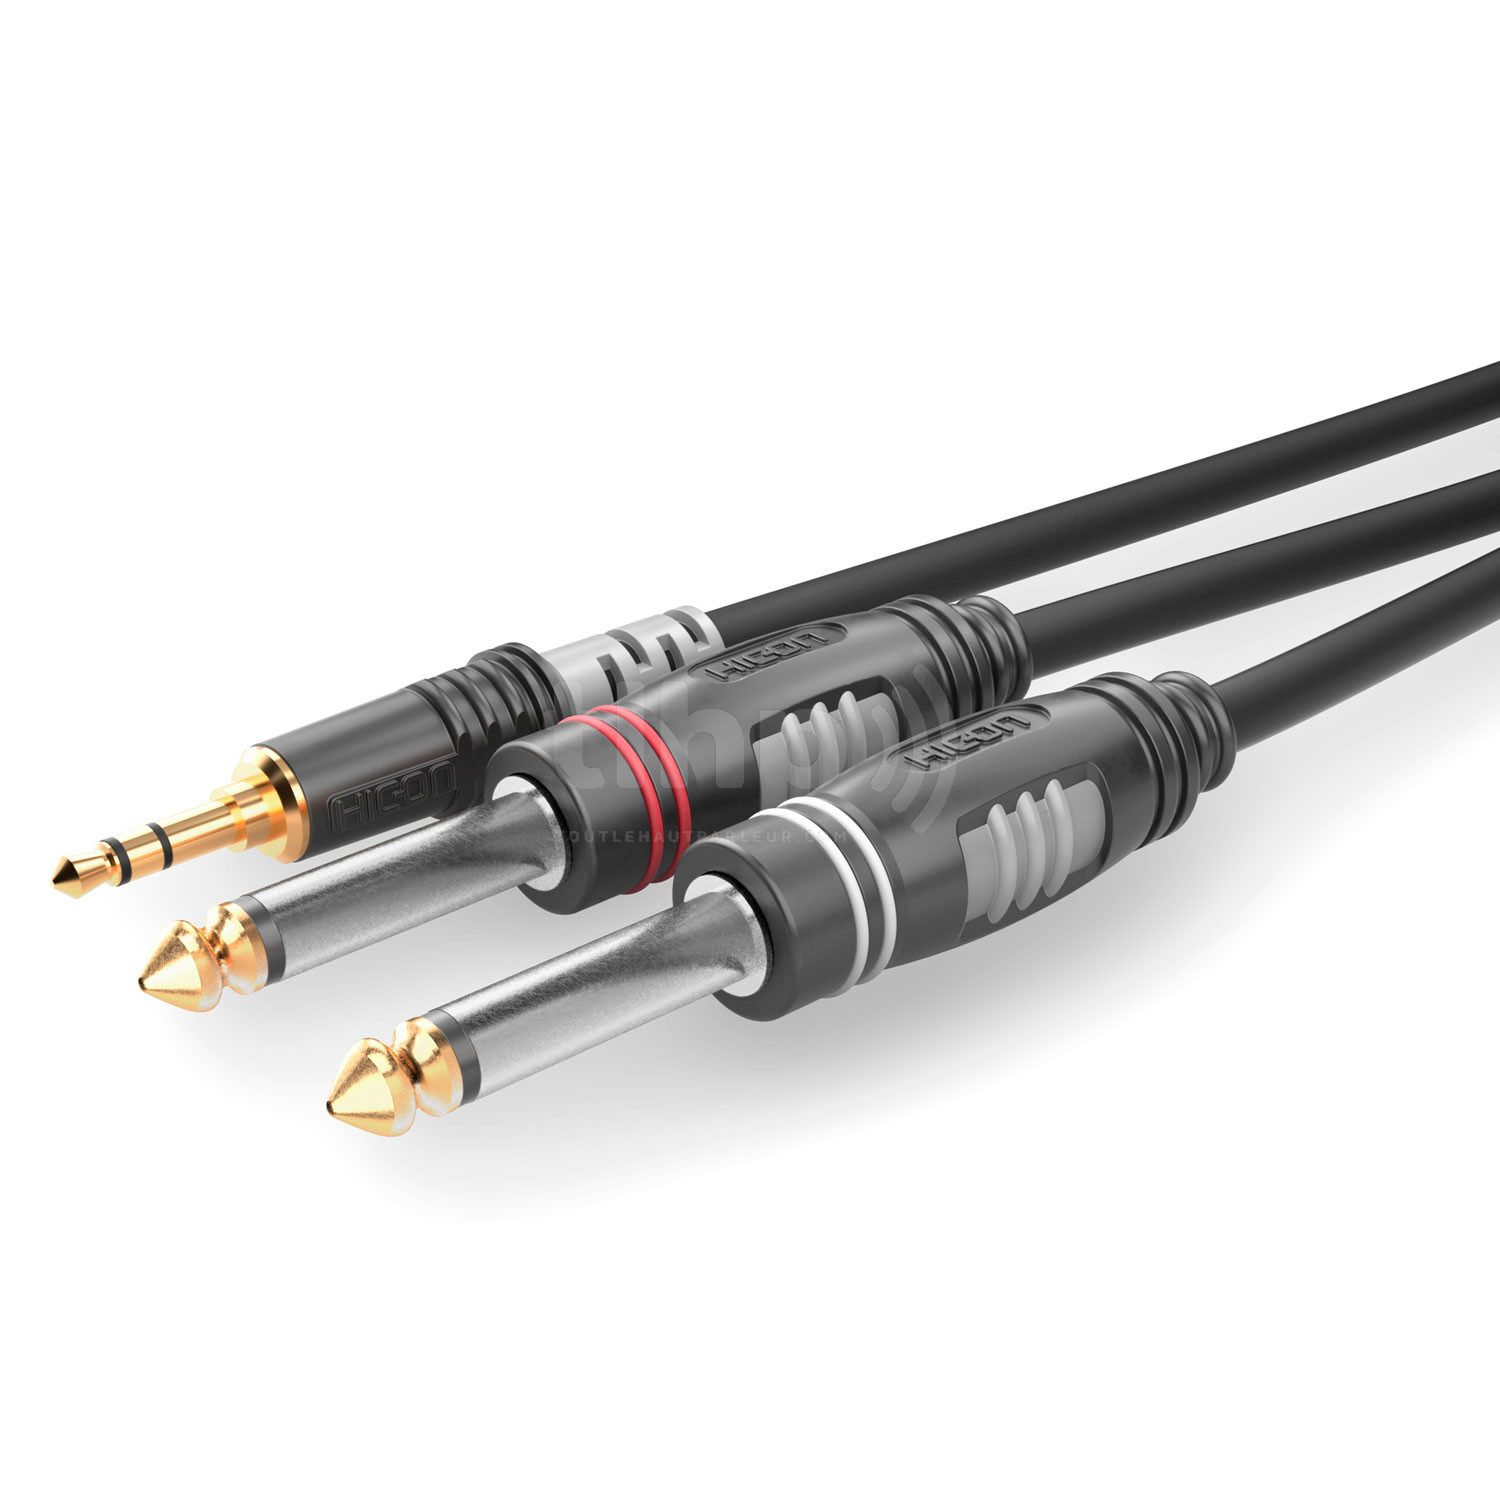 6.0m Y audio cable, with 3.5 mm stereo mini Jack to double 6.35 mm mono